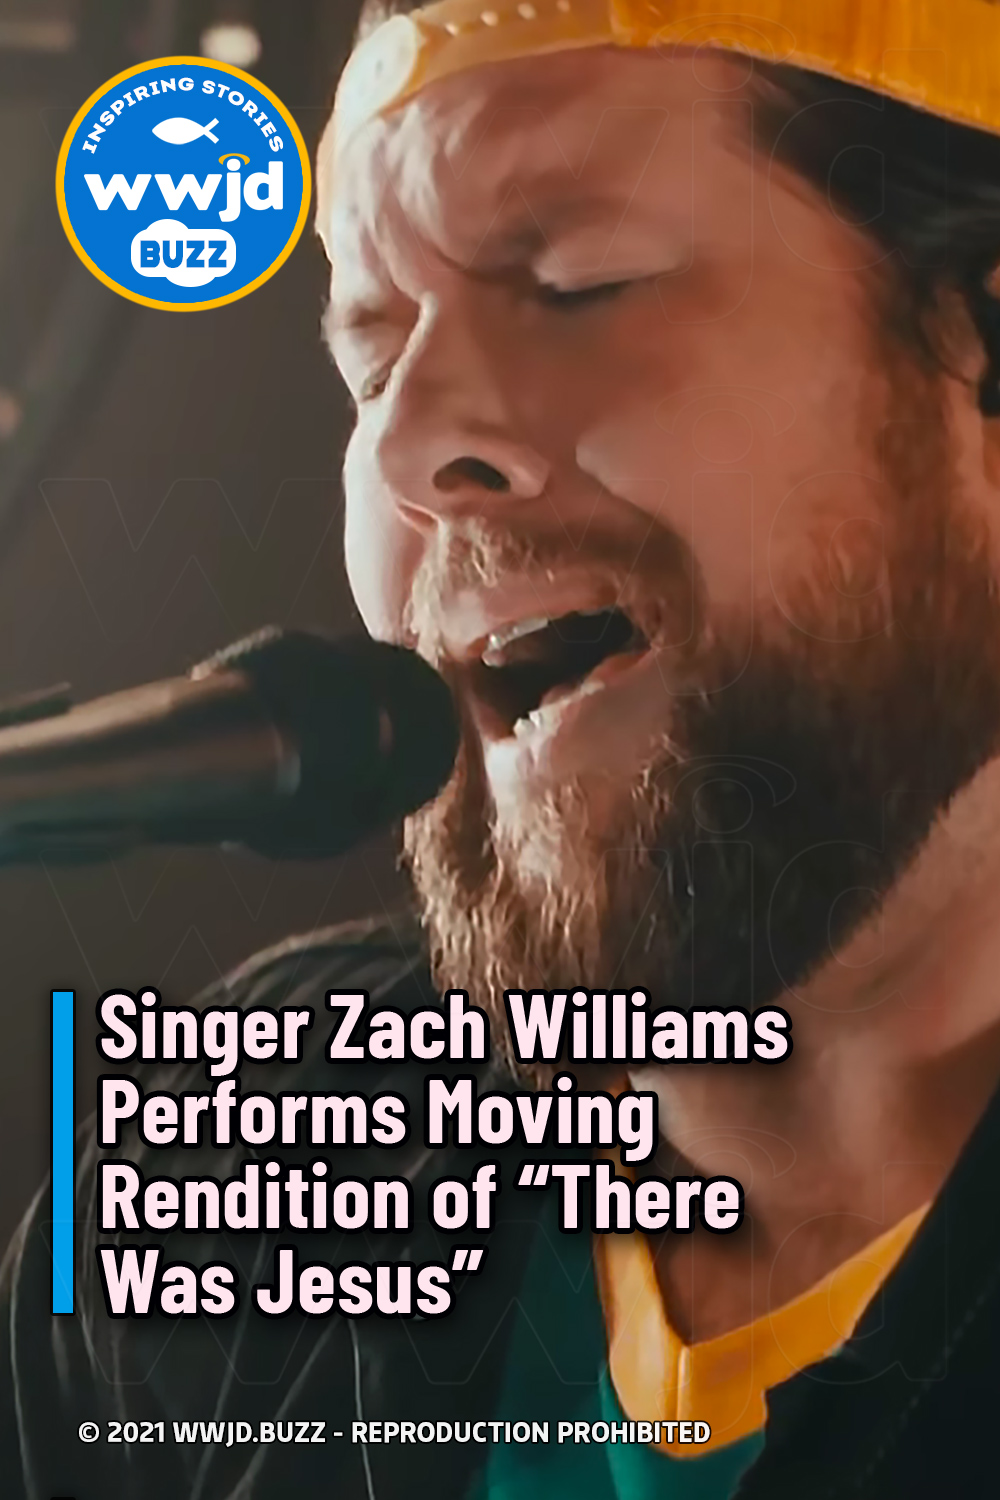 Singer Zach Williams Performs Moving Rendition of “There Was Jesus”